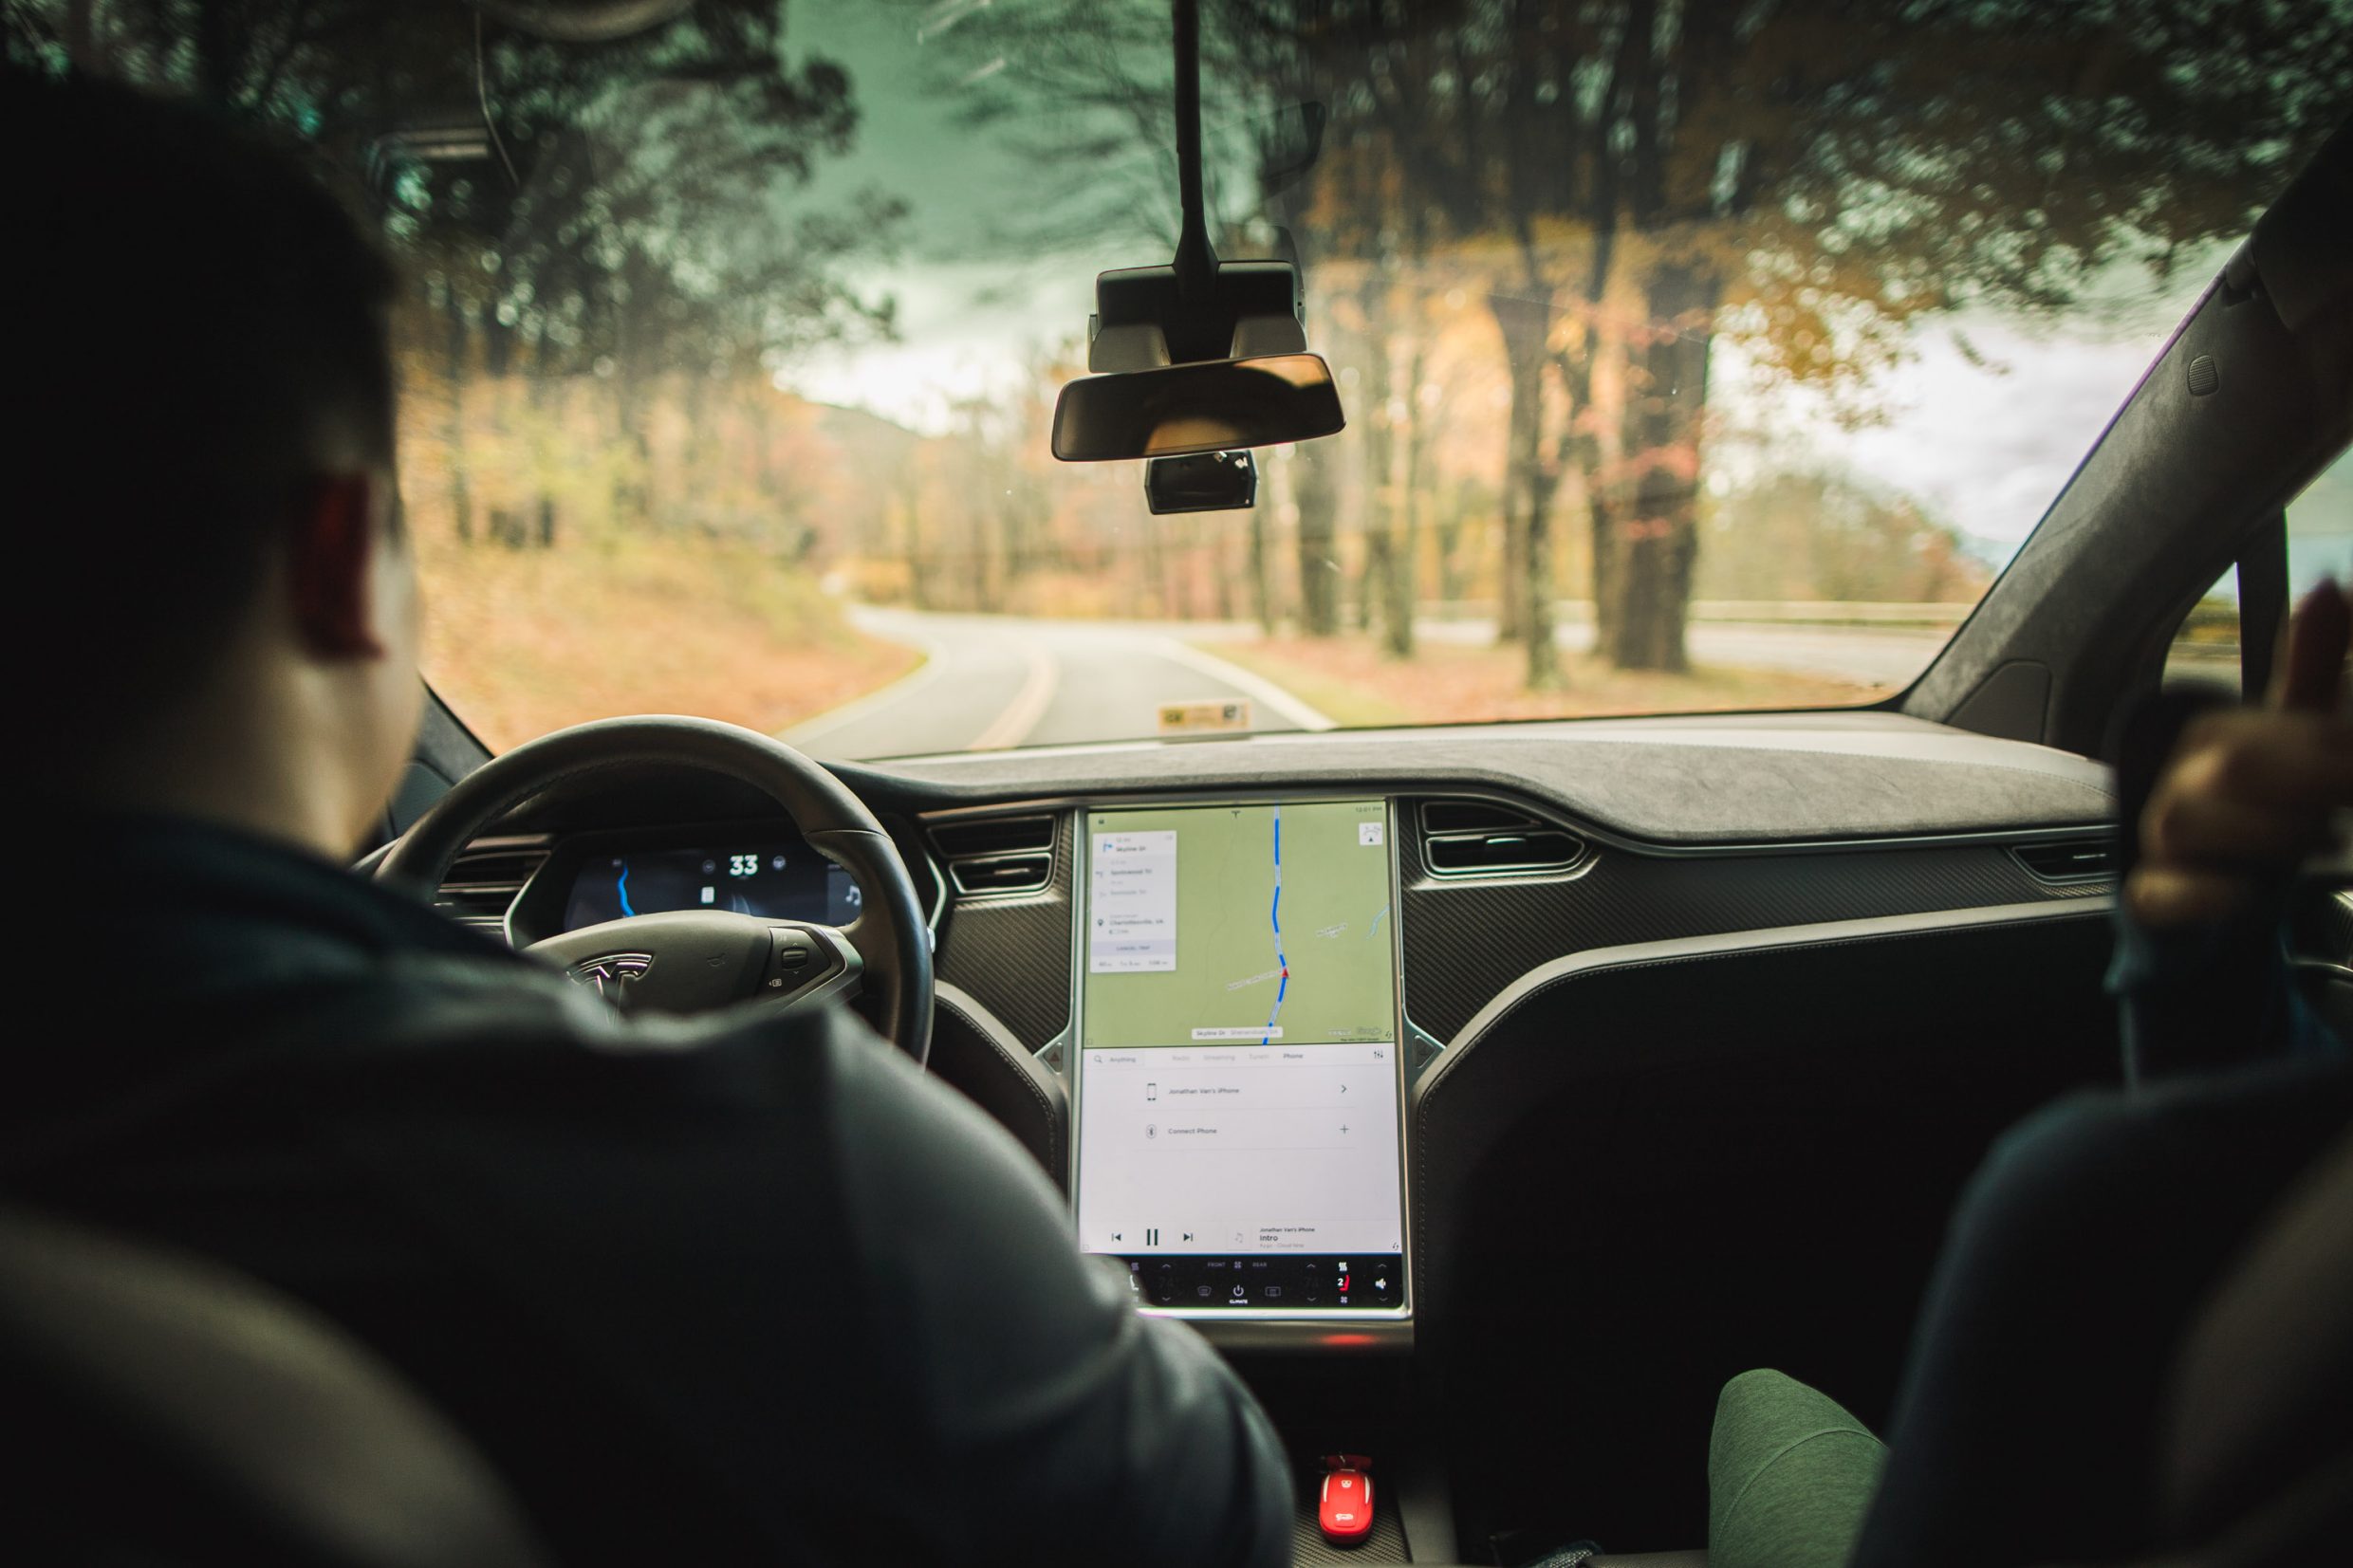 Driving a Tesla Model X into the Virginia Mountains for fall foliage